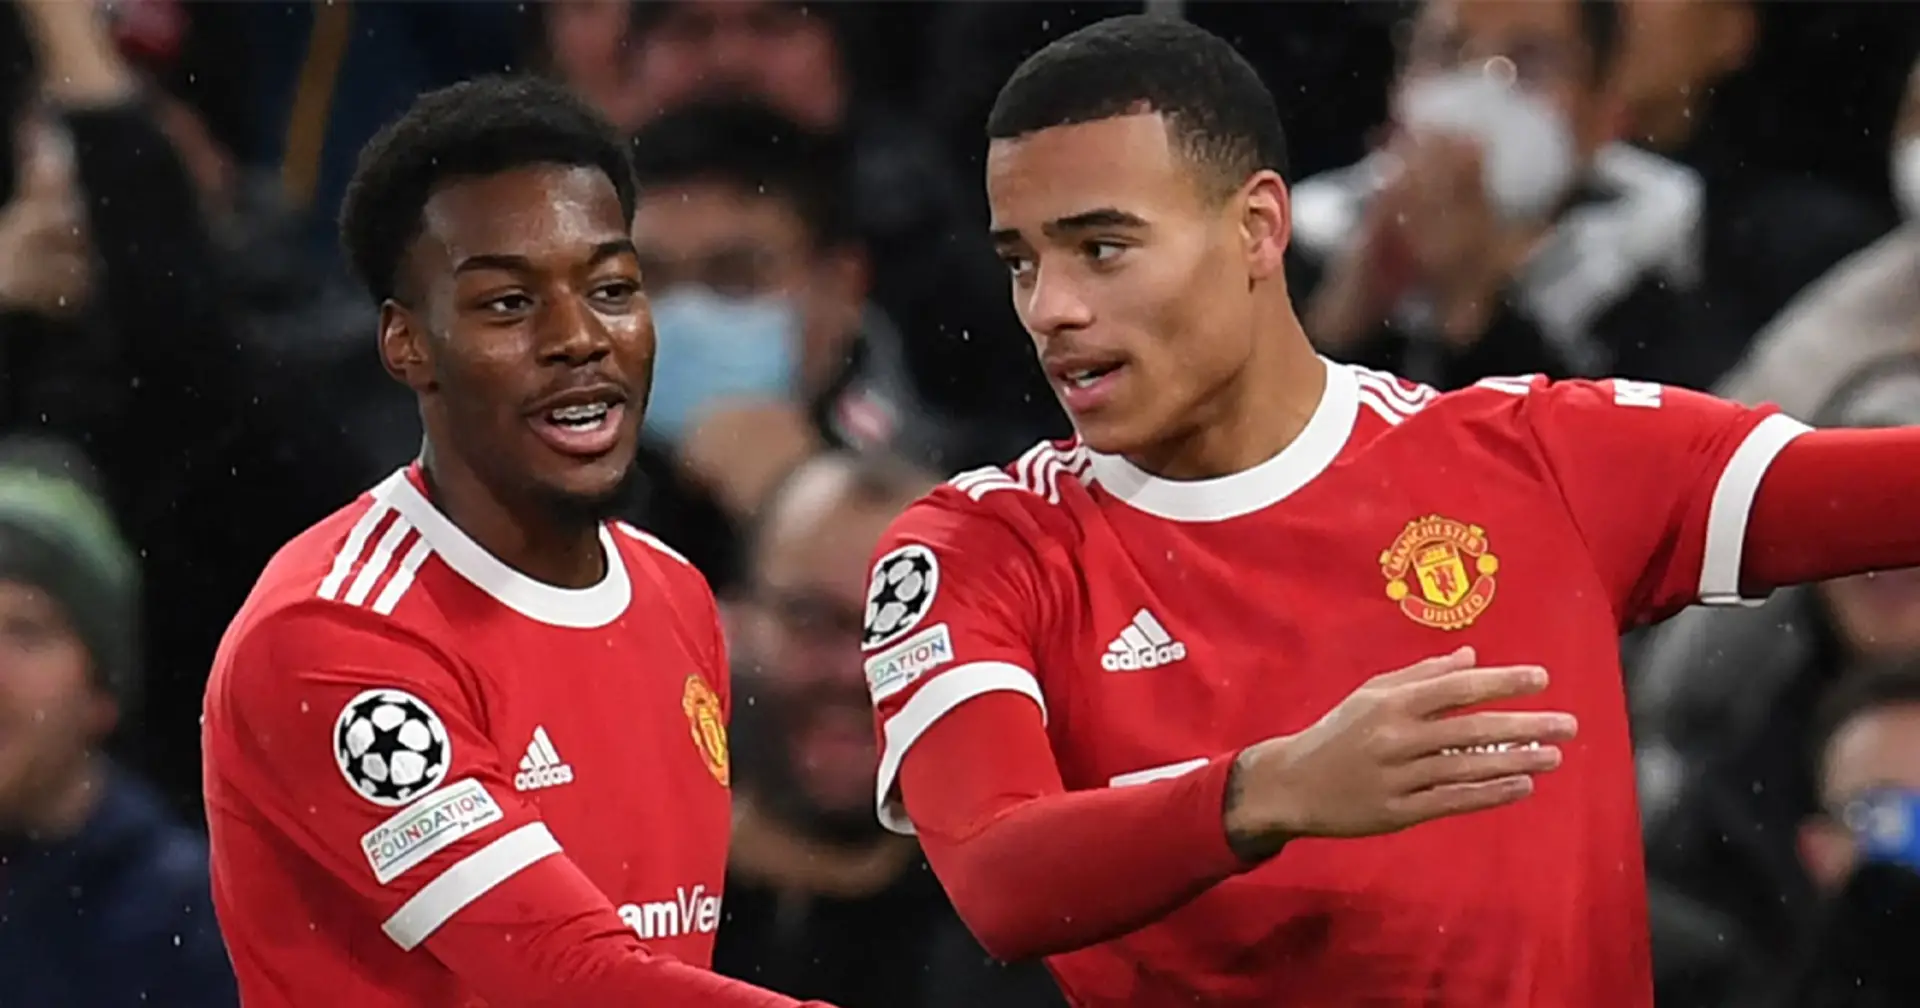 Greenwood 8, Wan-Bissaka 5: rating Man United players in Young Boys draw